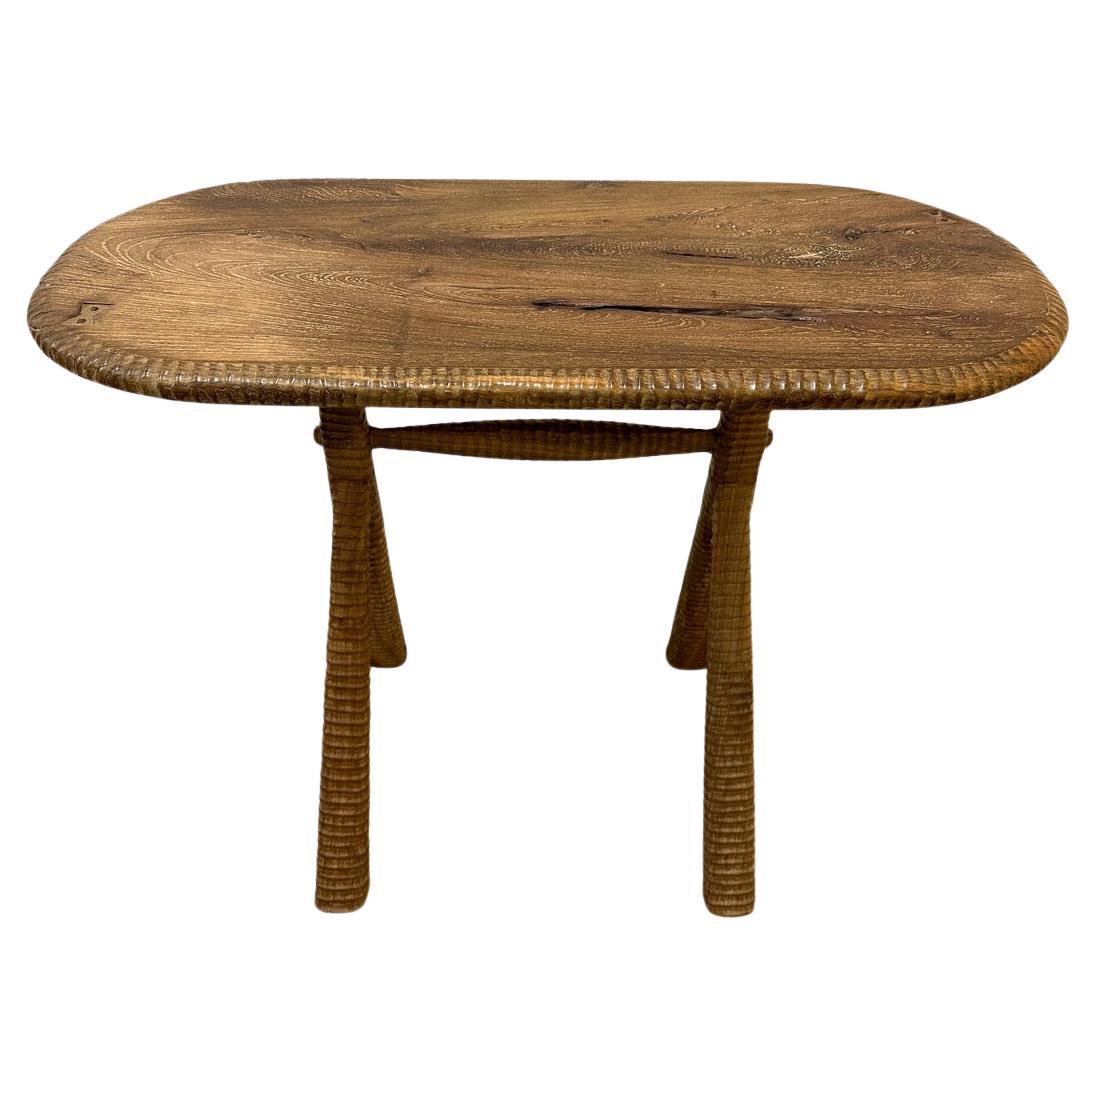 Andrianna Shamaris Midcentury Couture Teak Wood Side Table For Sale